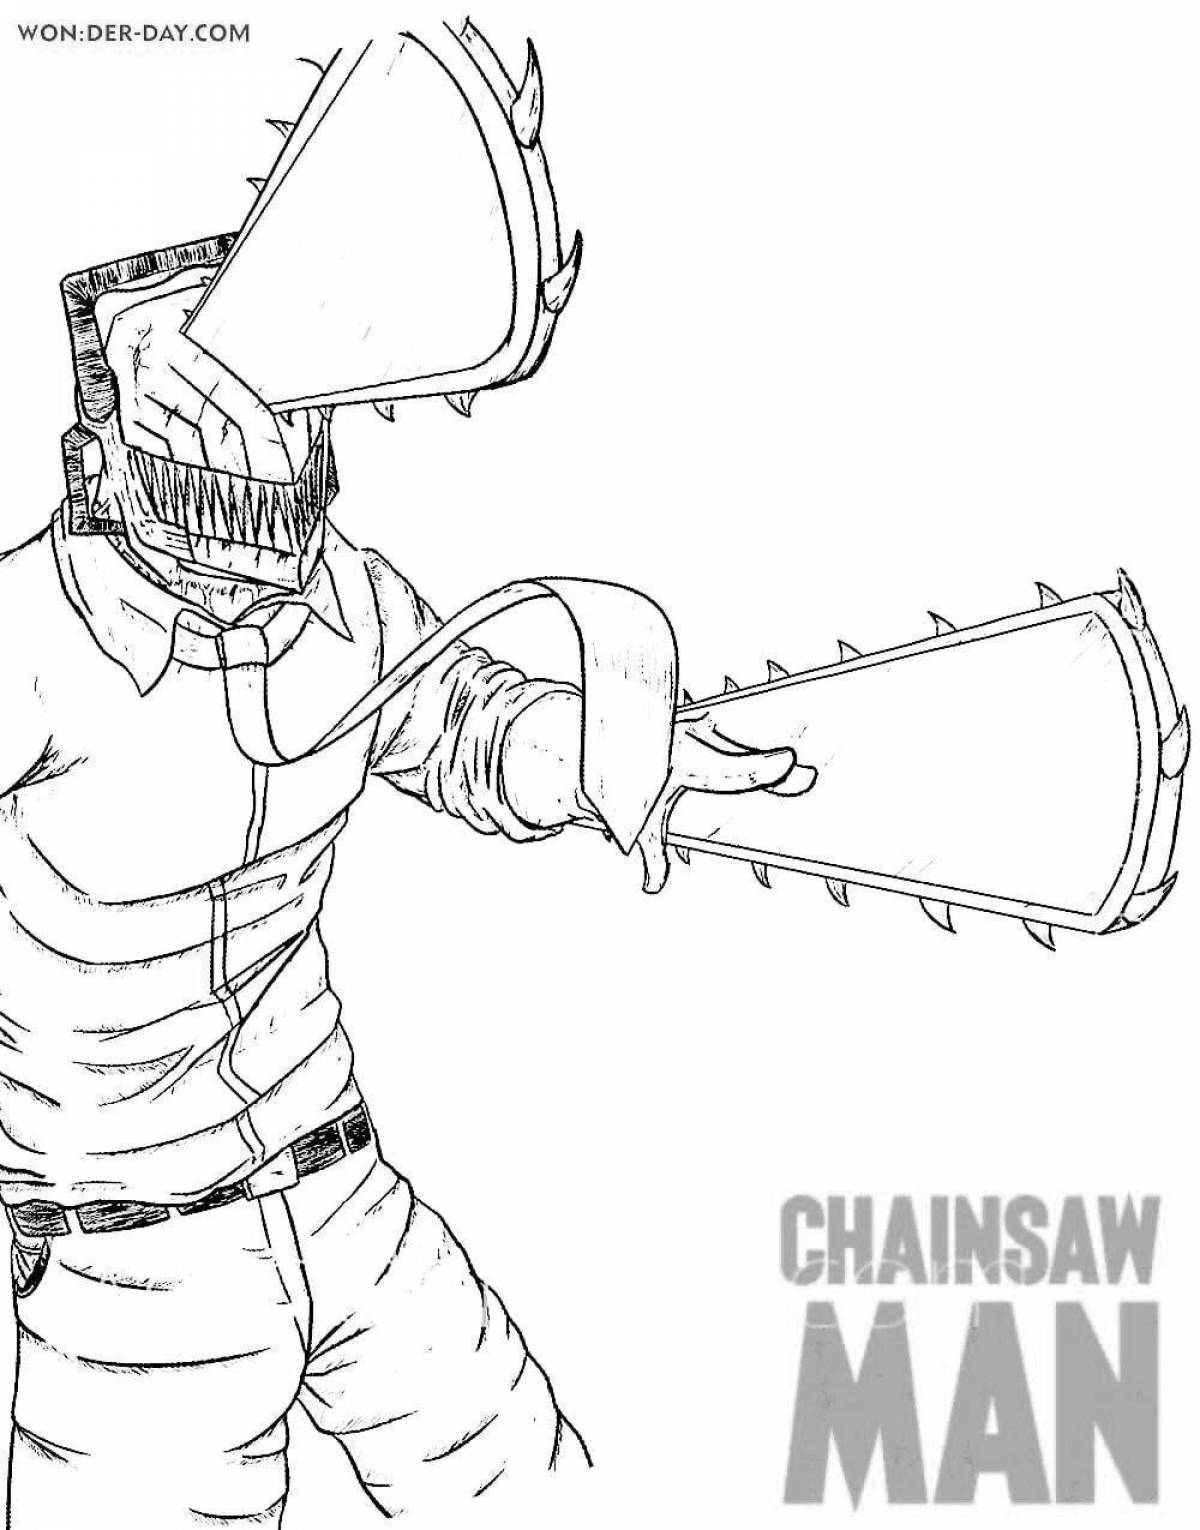 Chainsaw Invitational Coloring Page